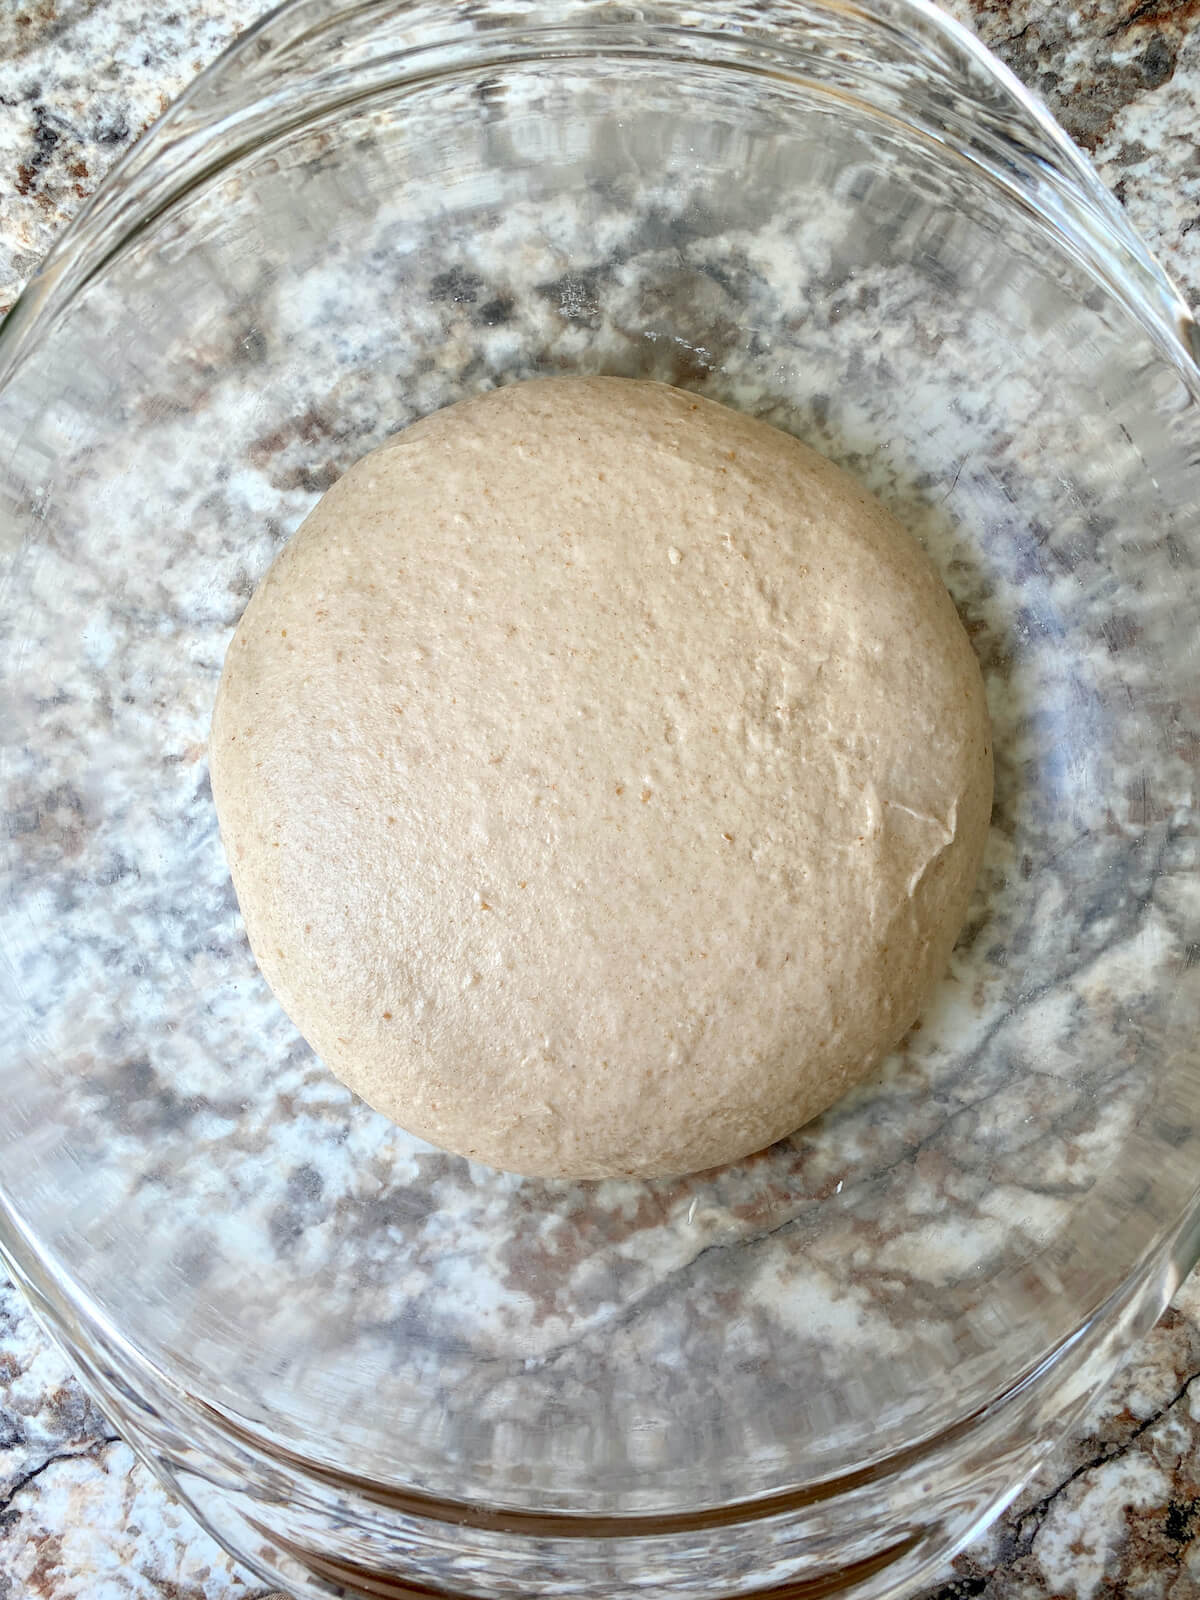 The breadstick dough after bulk fermentation in a mixing bowl.